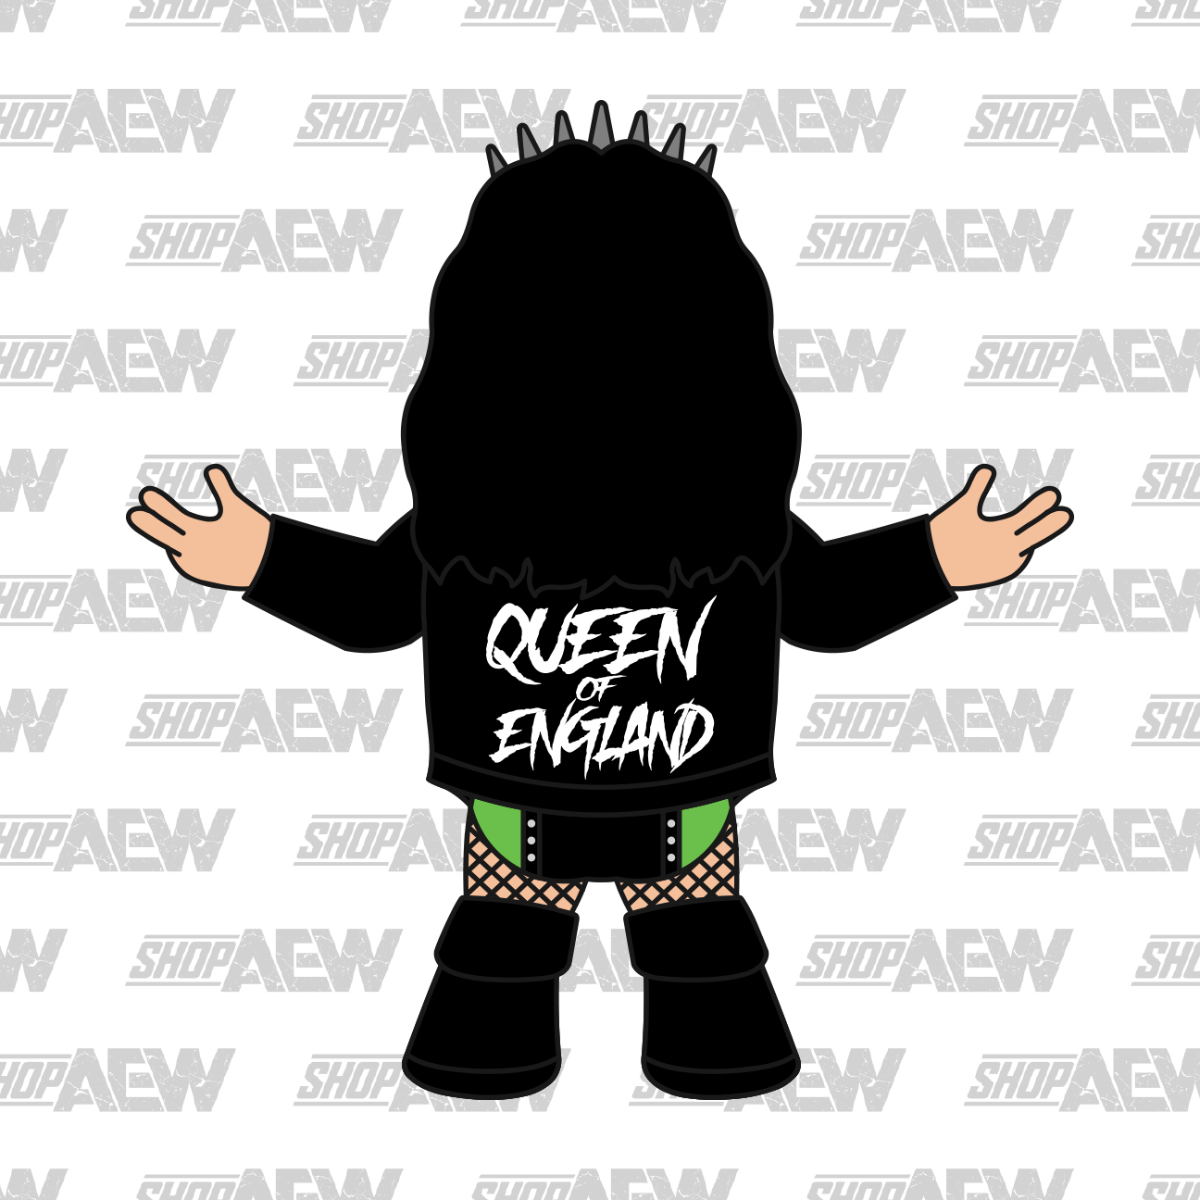 Saraya's (All In 2023) Micro Brawler is available for 2 weeks only on  @shopaew Pre-order closes September 20th! Join WhatNot @ WHATH